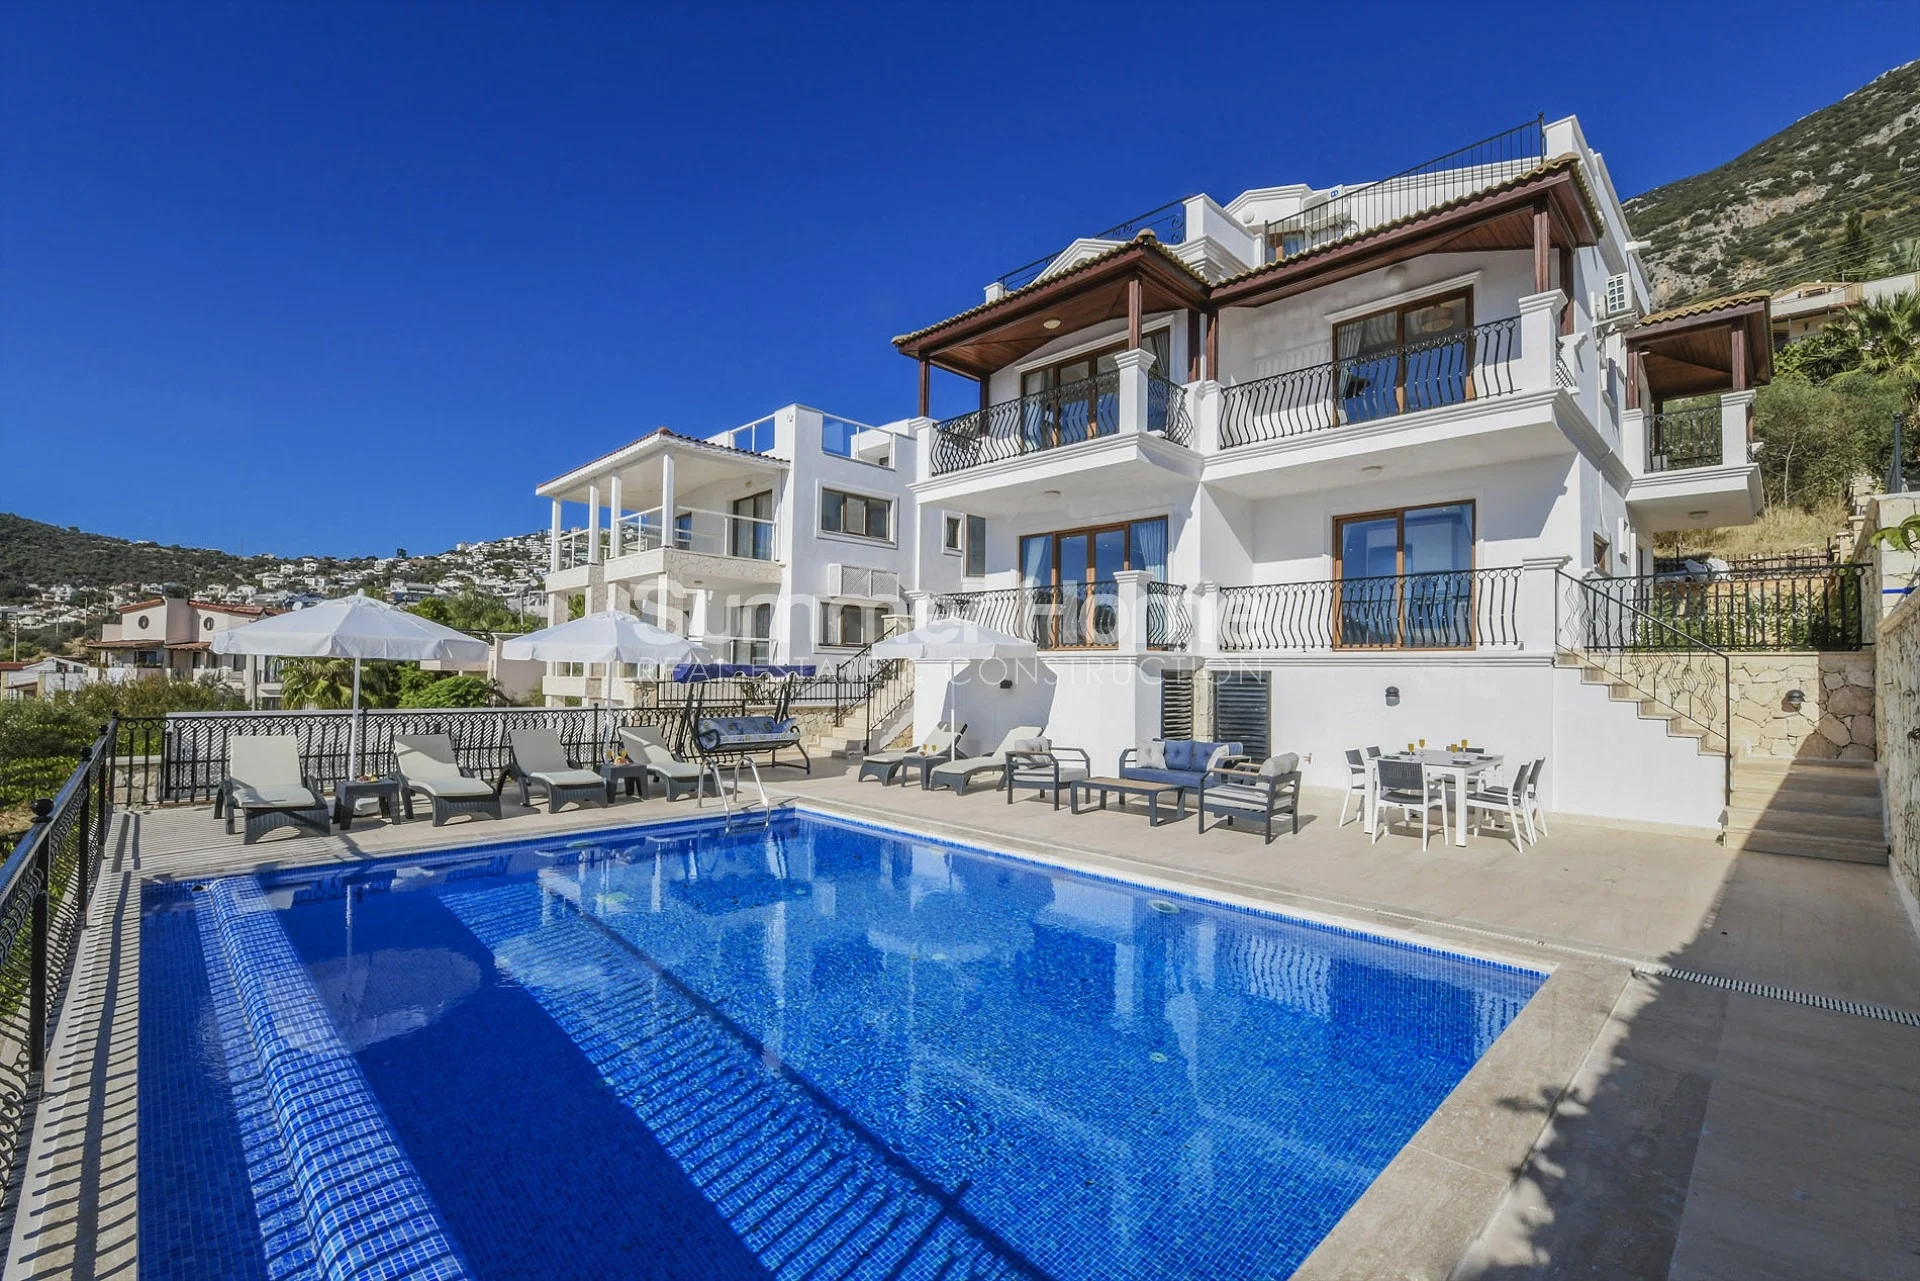 Five-bedroom tranquil villa with private pool in Kalkan general - 1